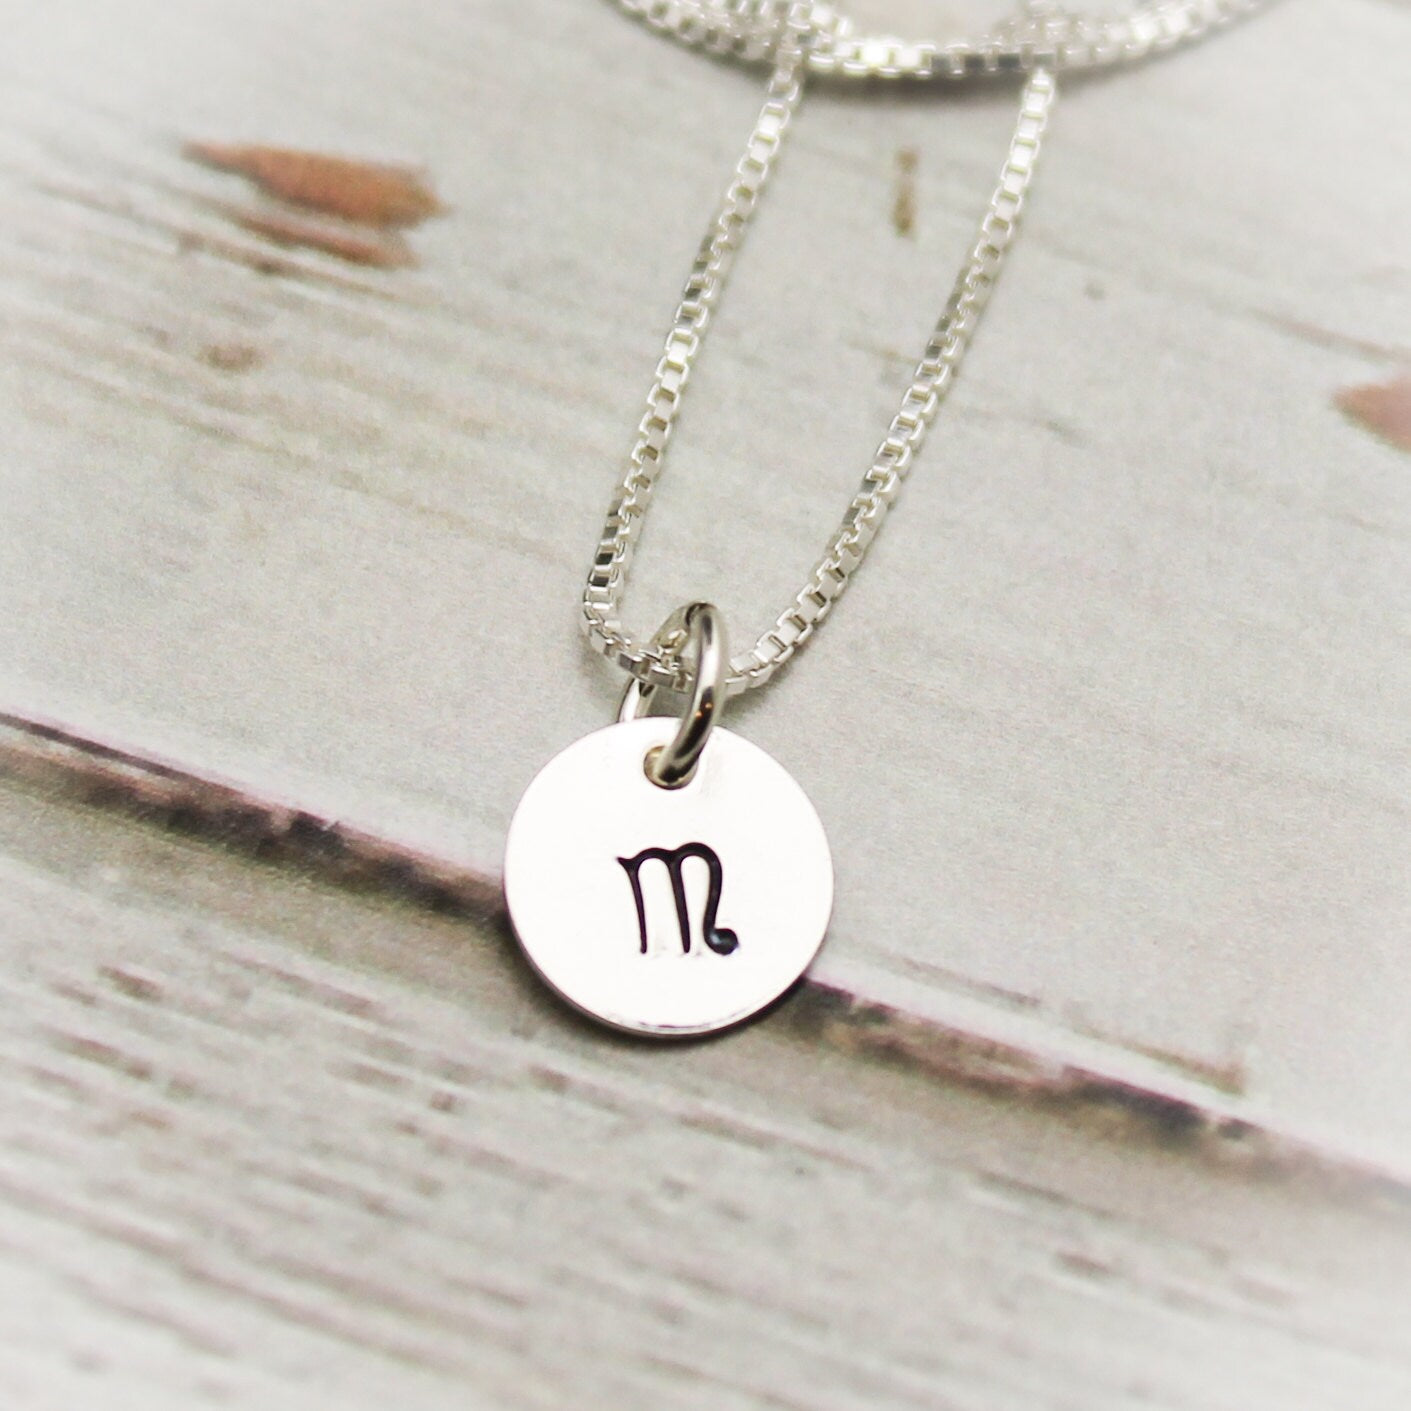 Tiny and Petite Sterling Silver Initial Necklace Hand Stamped Jewelry